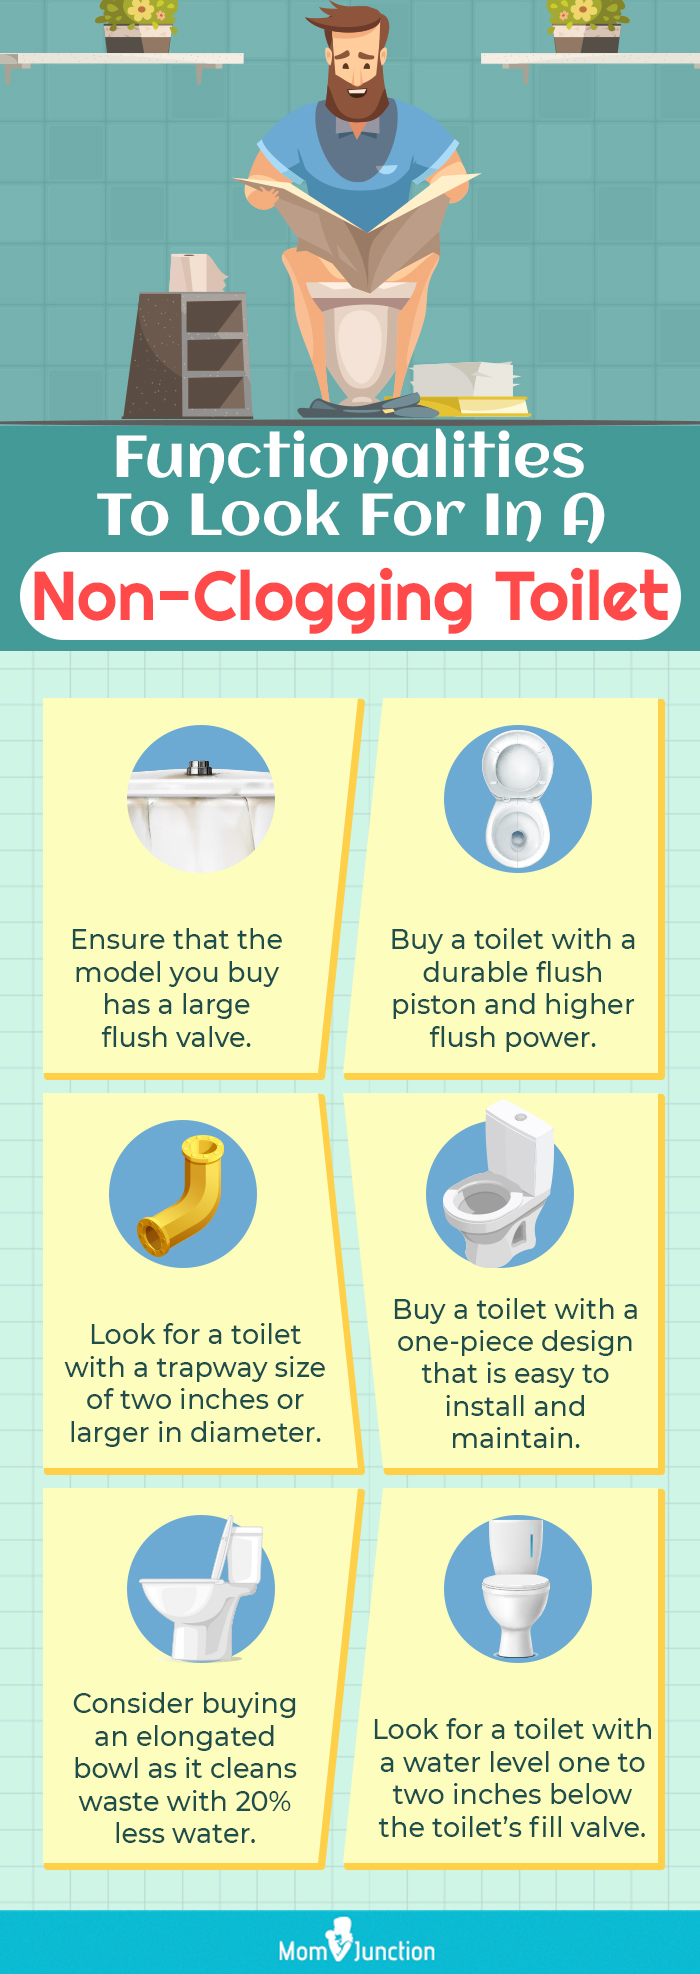 Functionalities To Look For In A Non-Clogging Toilet [infographic]